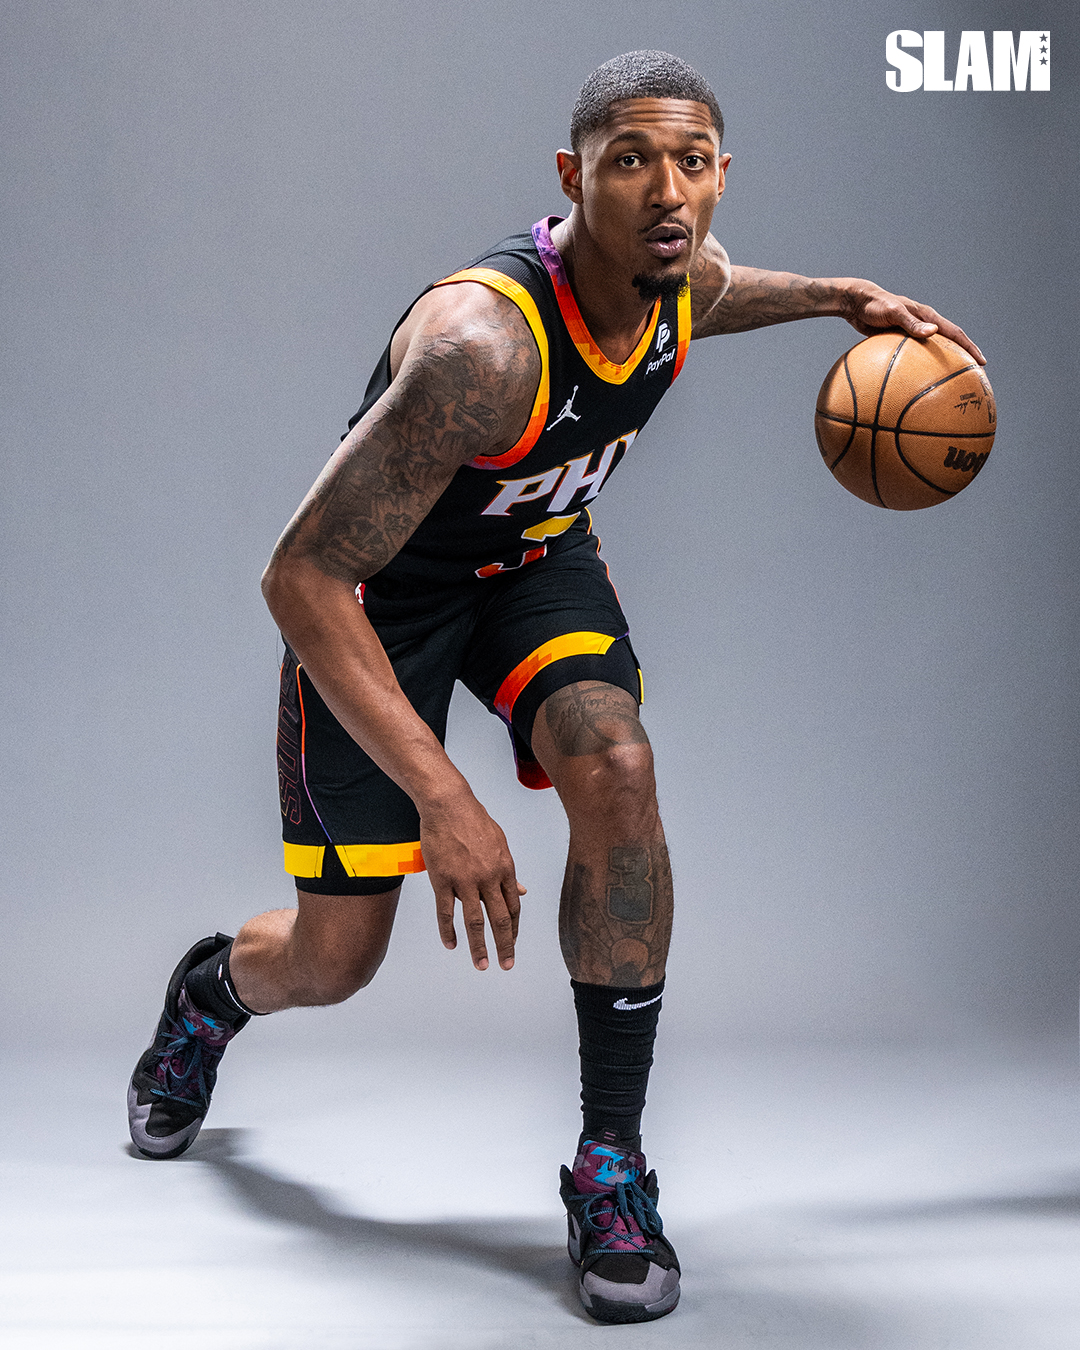 Bradley Beal’s Next Chapter: Phoenix’s New Star Opens Up About Getting Traded, His Legacy and Returning to His All-Star Form